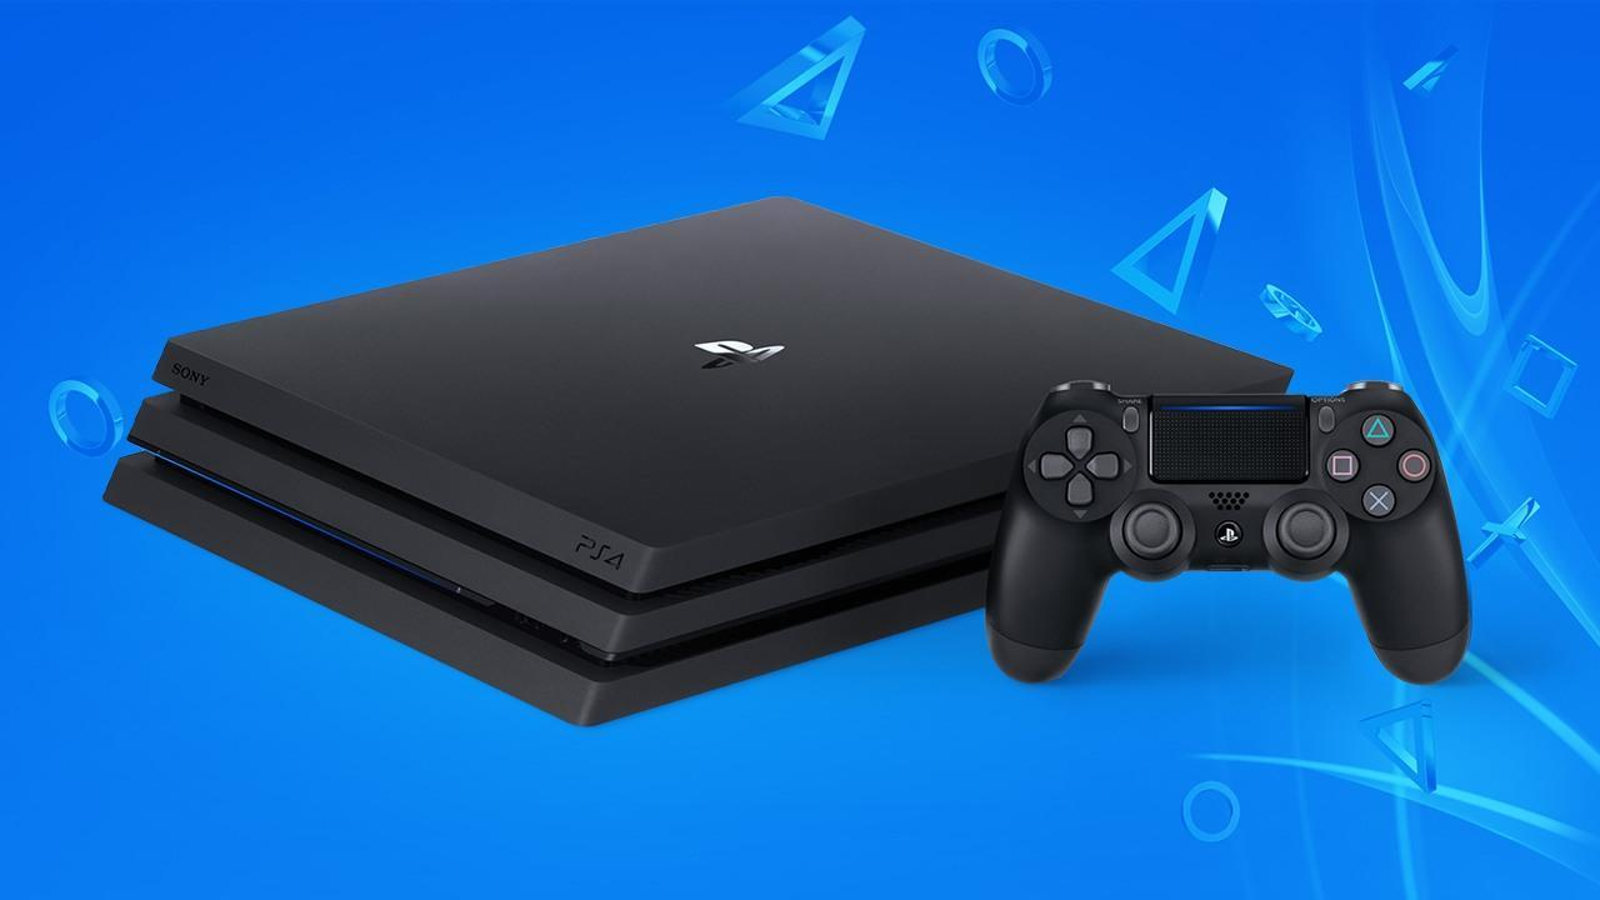 grund aflivning Tremble PS4 Pro and most other models discontinued in Japan | GamesIndustry.biz